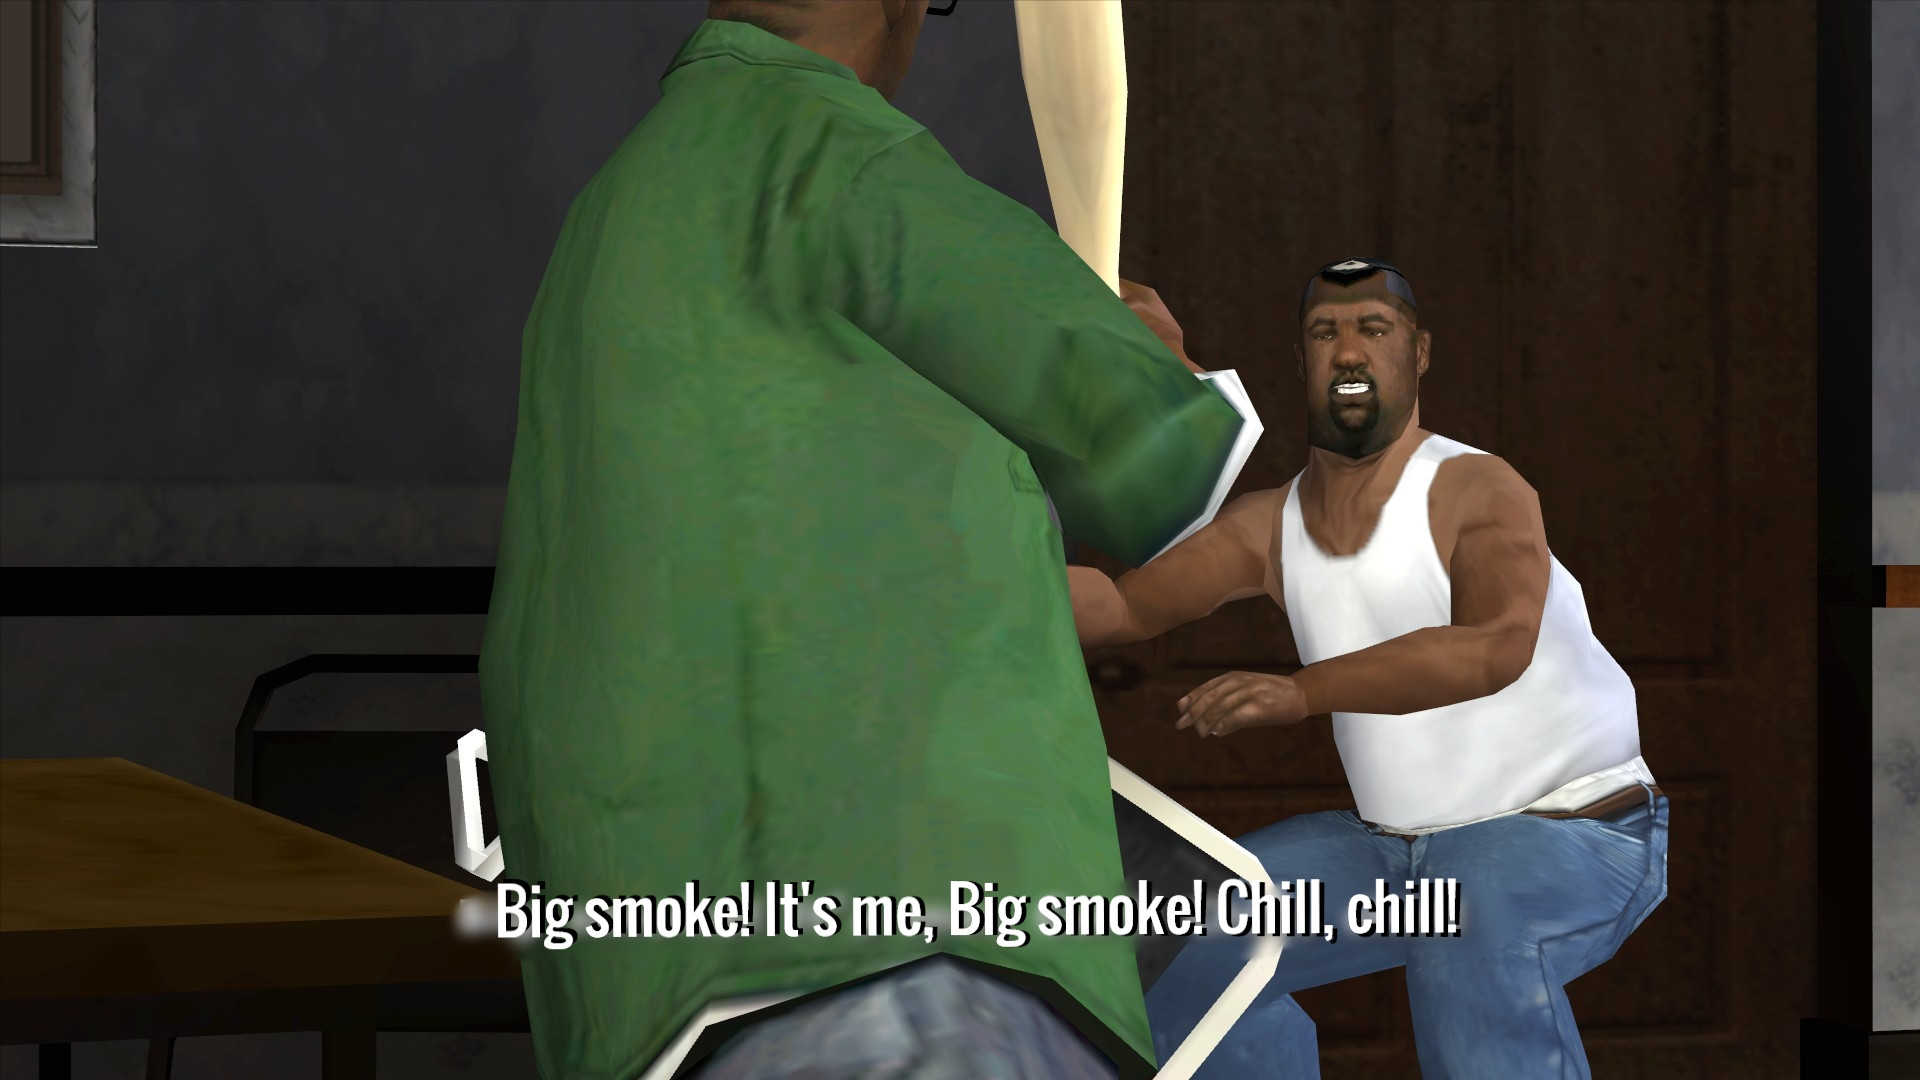 Grand Theft Auto: San Andreas Wallpapers (37+ images inside)